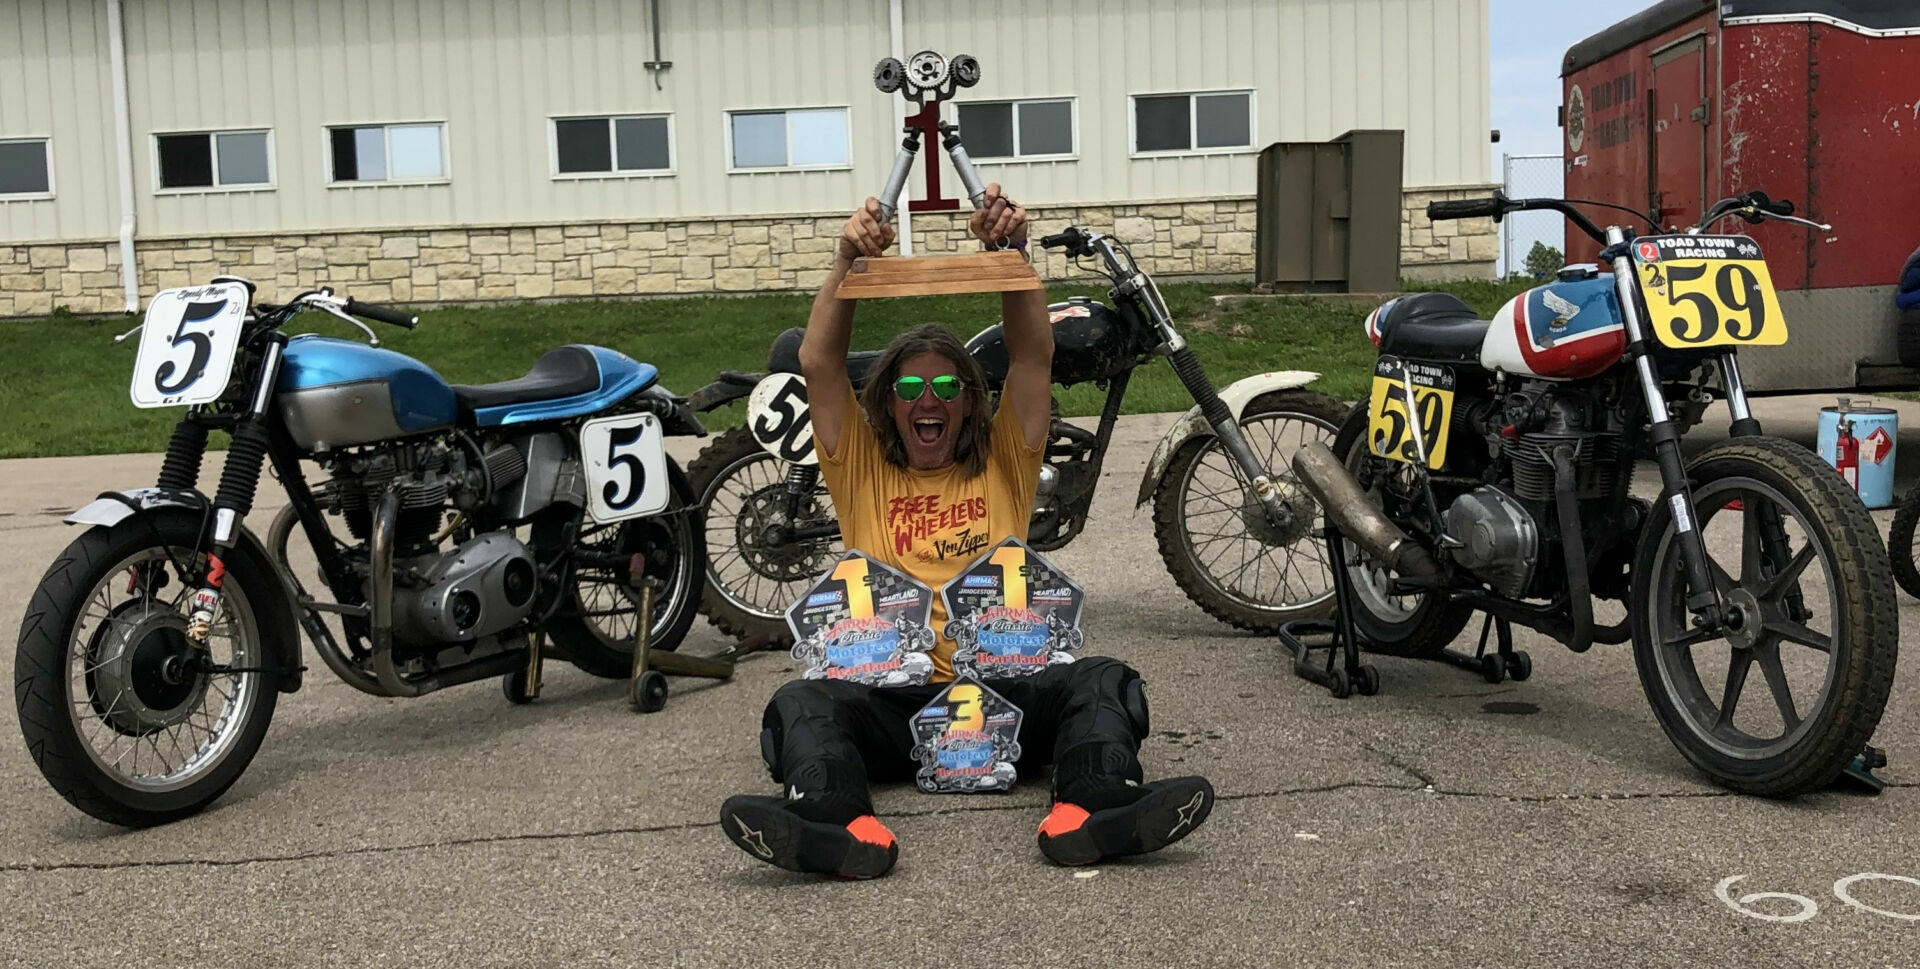 Greg Tomlinson, winner of the 2022 AHRMA Classic MotoFest™ in the Heartland Triple Crown, with his (from left) road race, motocross, and flat track bikes. Photo by Stephanie Vetterly, courtesy AHRMA.